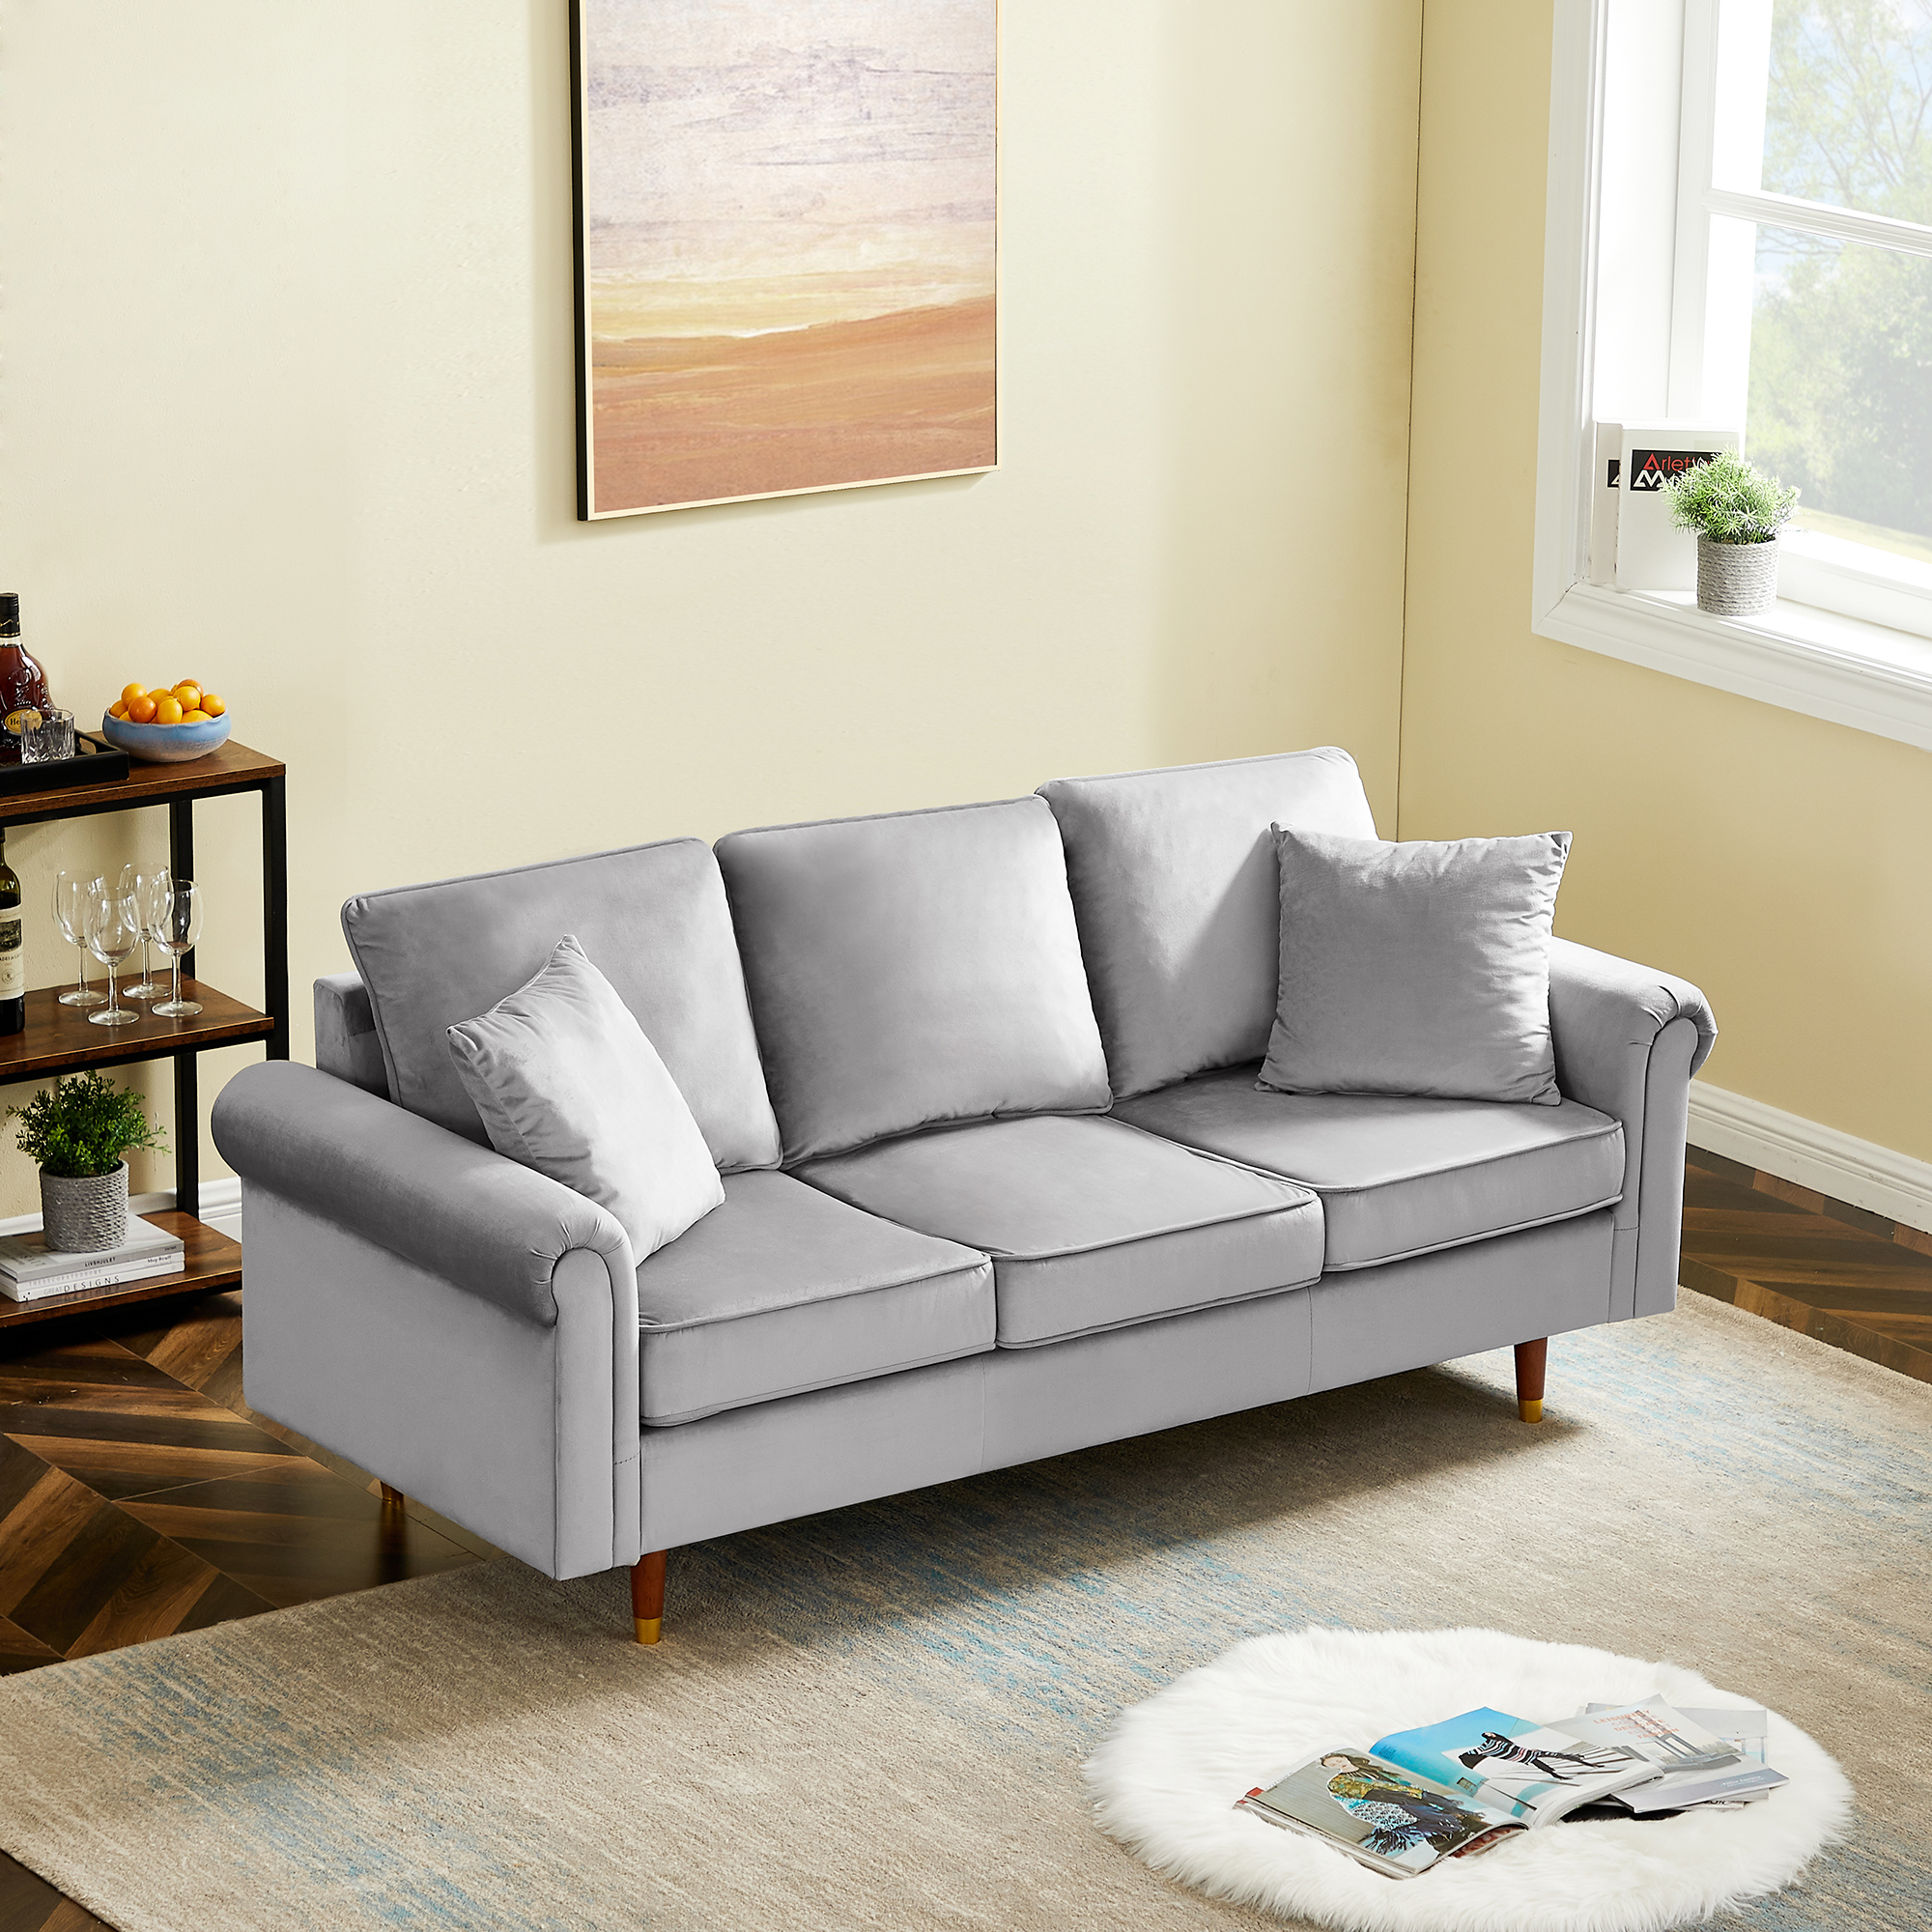 Velvet Sofa Couch with 2 Pillows, Modern 3 Seater  Sofa With Wood Legs for Living Room and Bedroom .-Boyel Living